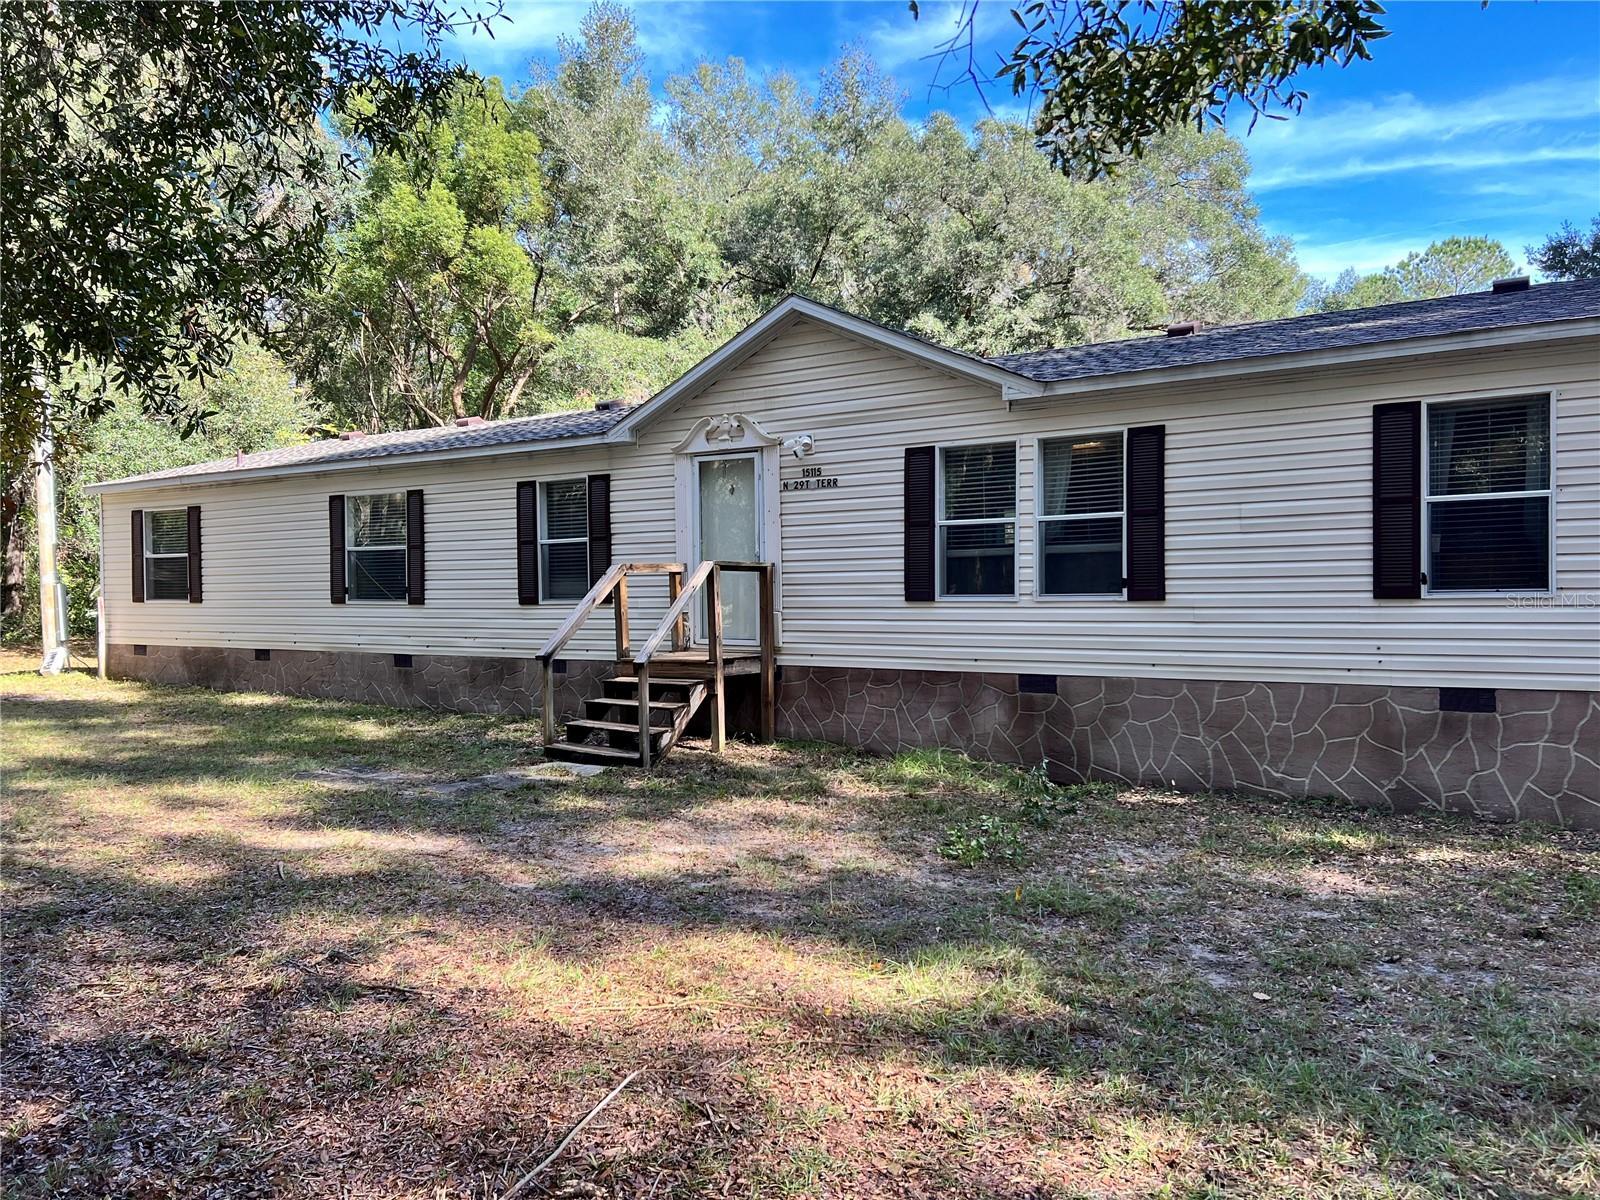 15115 29TH, REDDICK, Manufactured Home - Post 1977,  for sale, The Mount Dora Group 